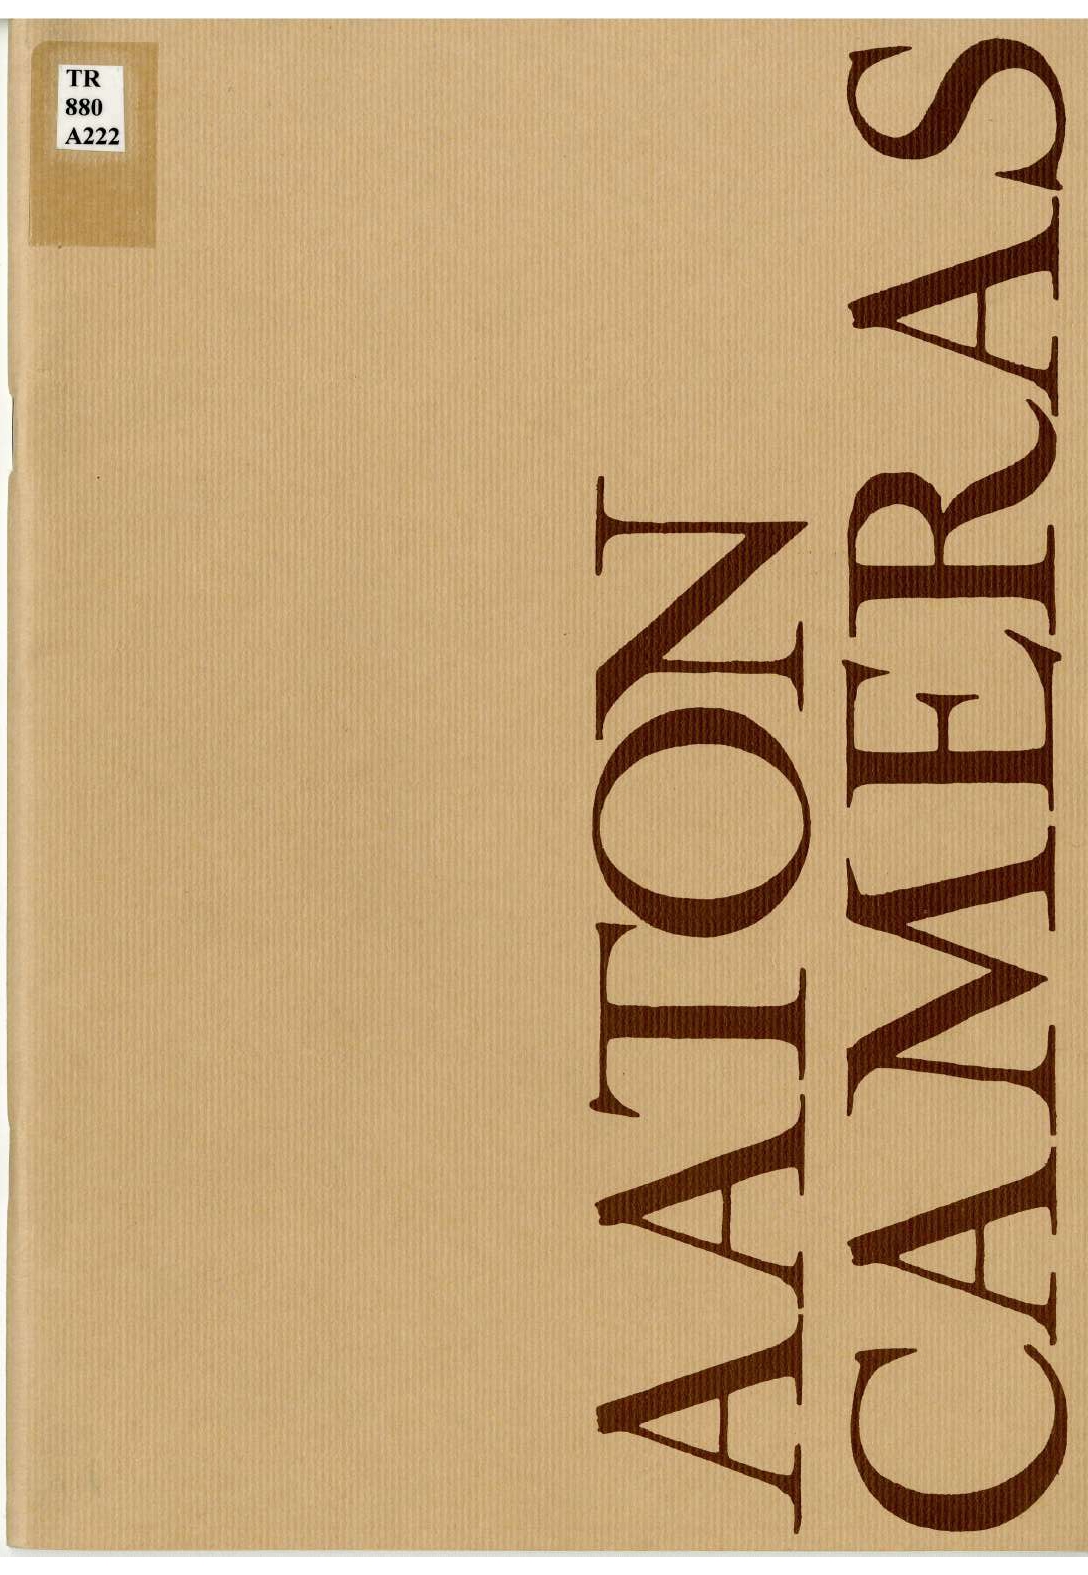 Cover page of the brochure. The cover is solid beige, with “Aaton Cameras” written vertically in large letters.